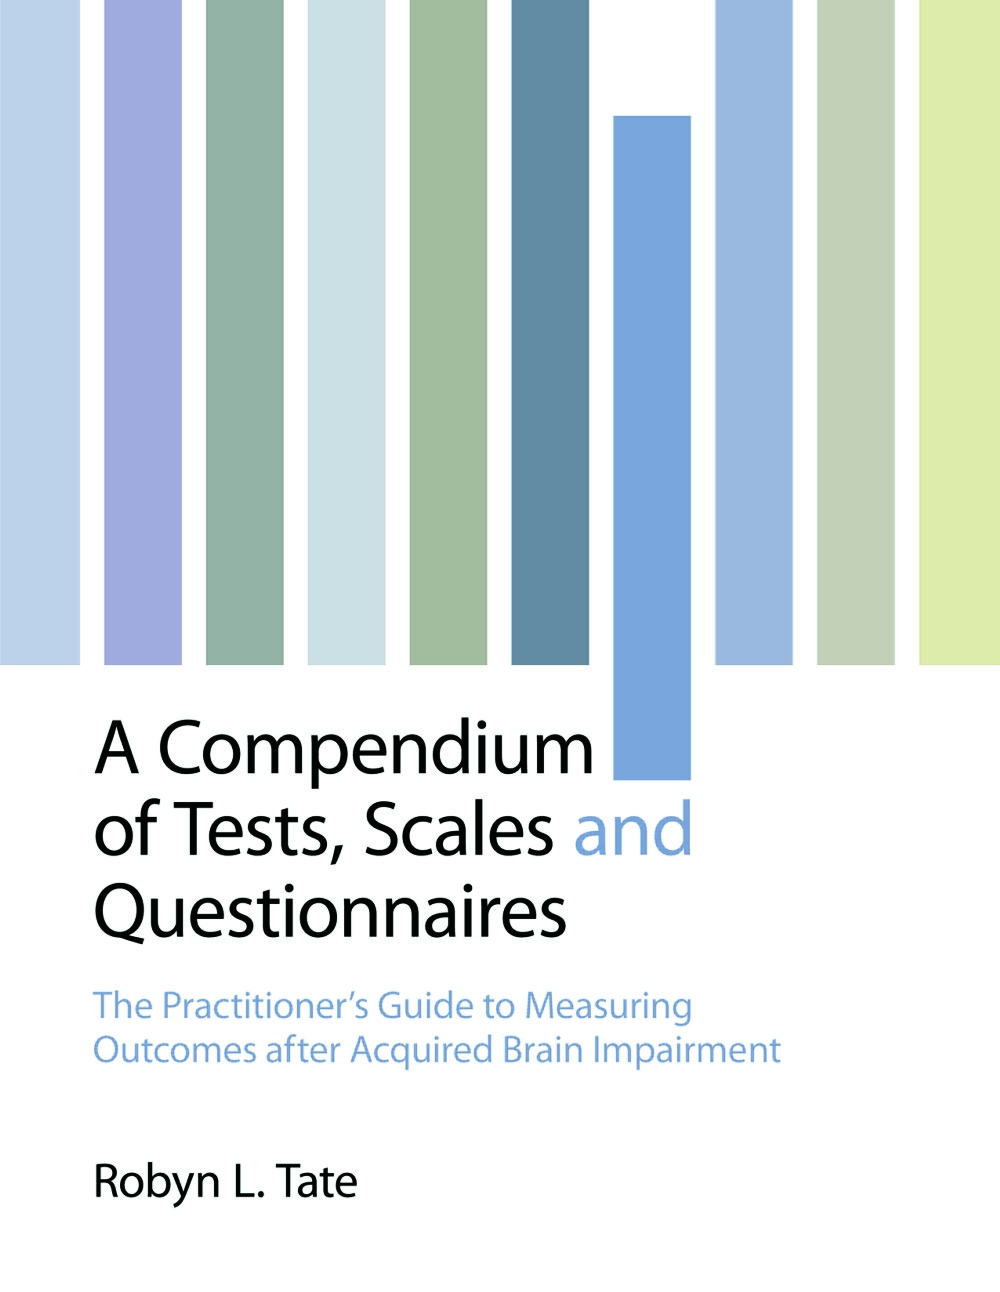 A Compendium of Tests, Scales and Questionnaires: The Practitioner’s Guide to Measuring Outcomes After Acquired Brain Impairment